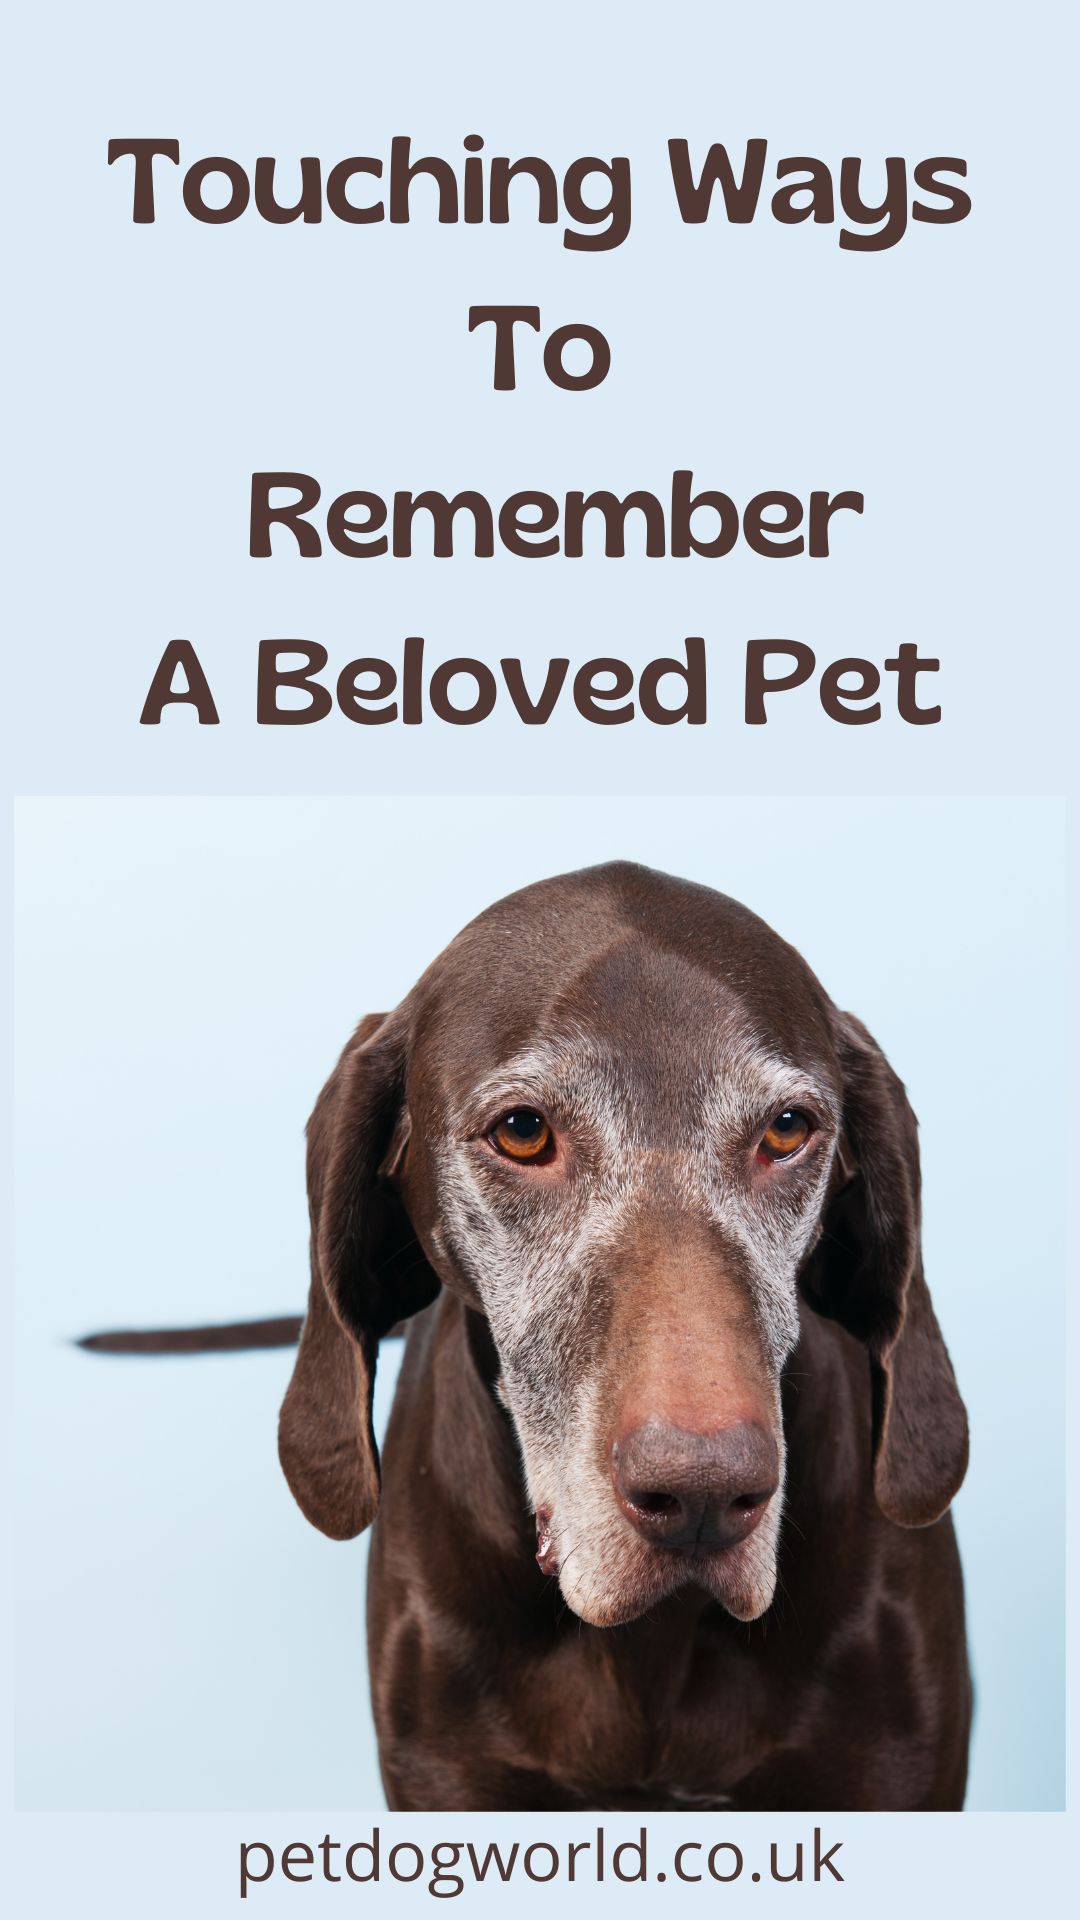 Losing a beloved pet is never easy. Whether it's your loyal dog, your cuddly cat, or a smaller animal, it's hard to deal with no longer having them there to greet you every day. When a pet dies, finding a way to remember them can help you to process the loss.